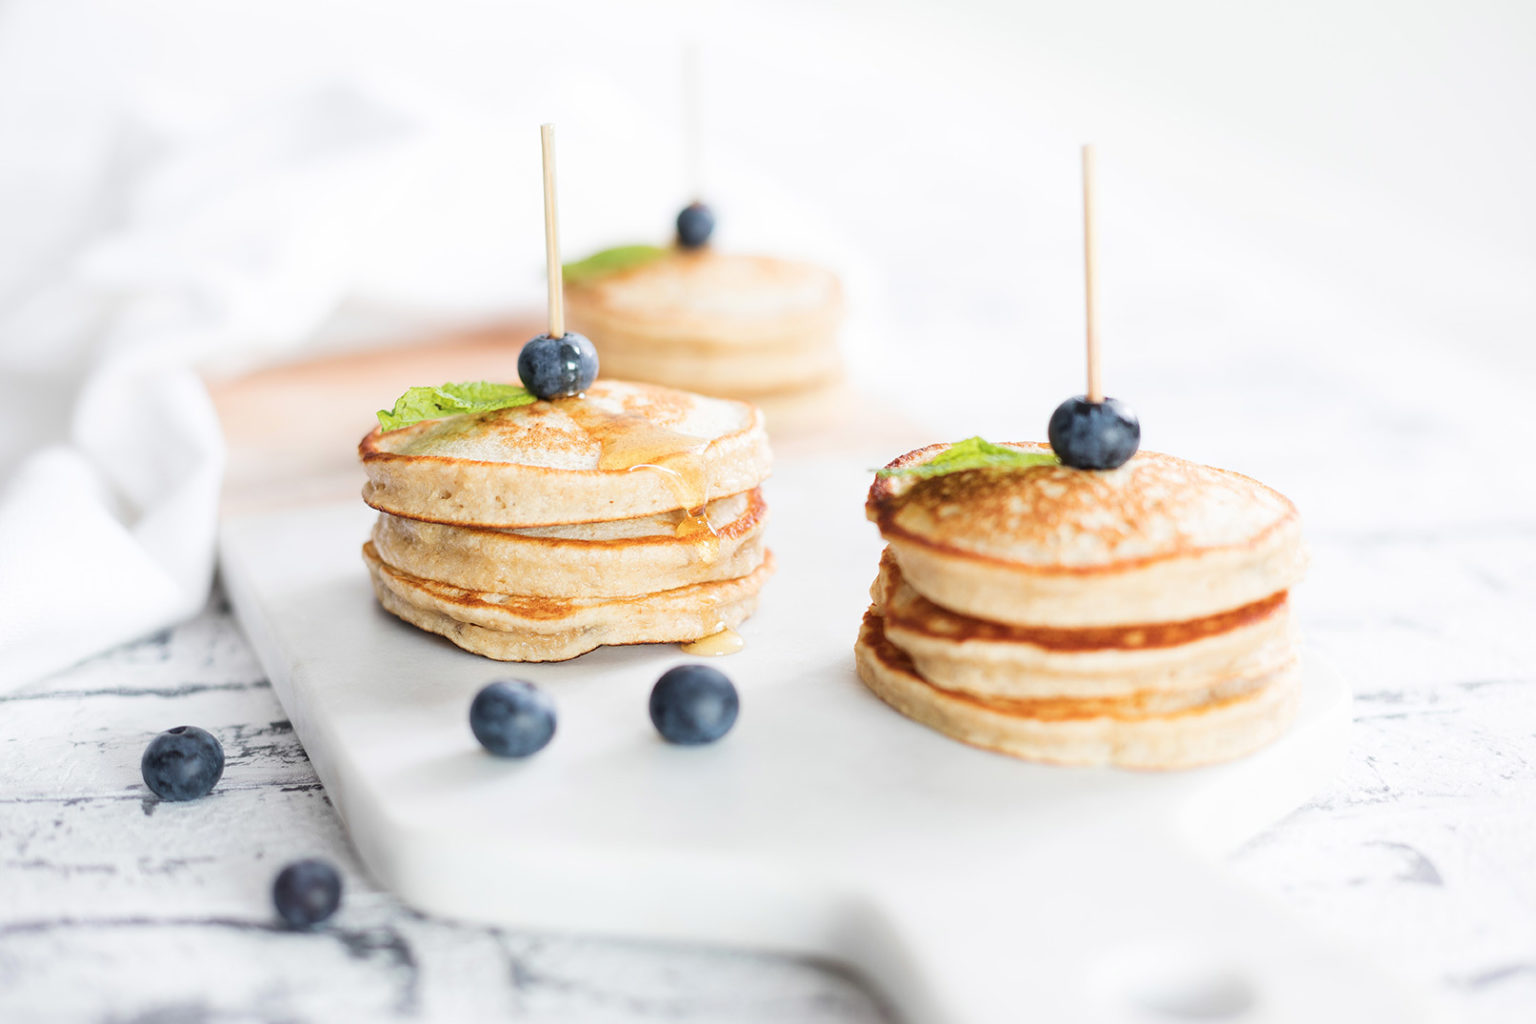 Three stacked piles of banana pikelets with a skewer and blueberries served on a chopping board